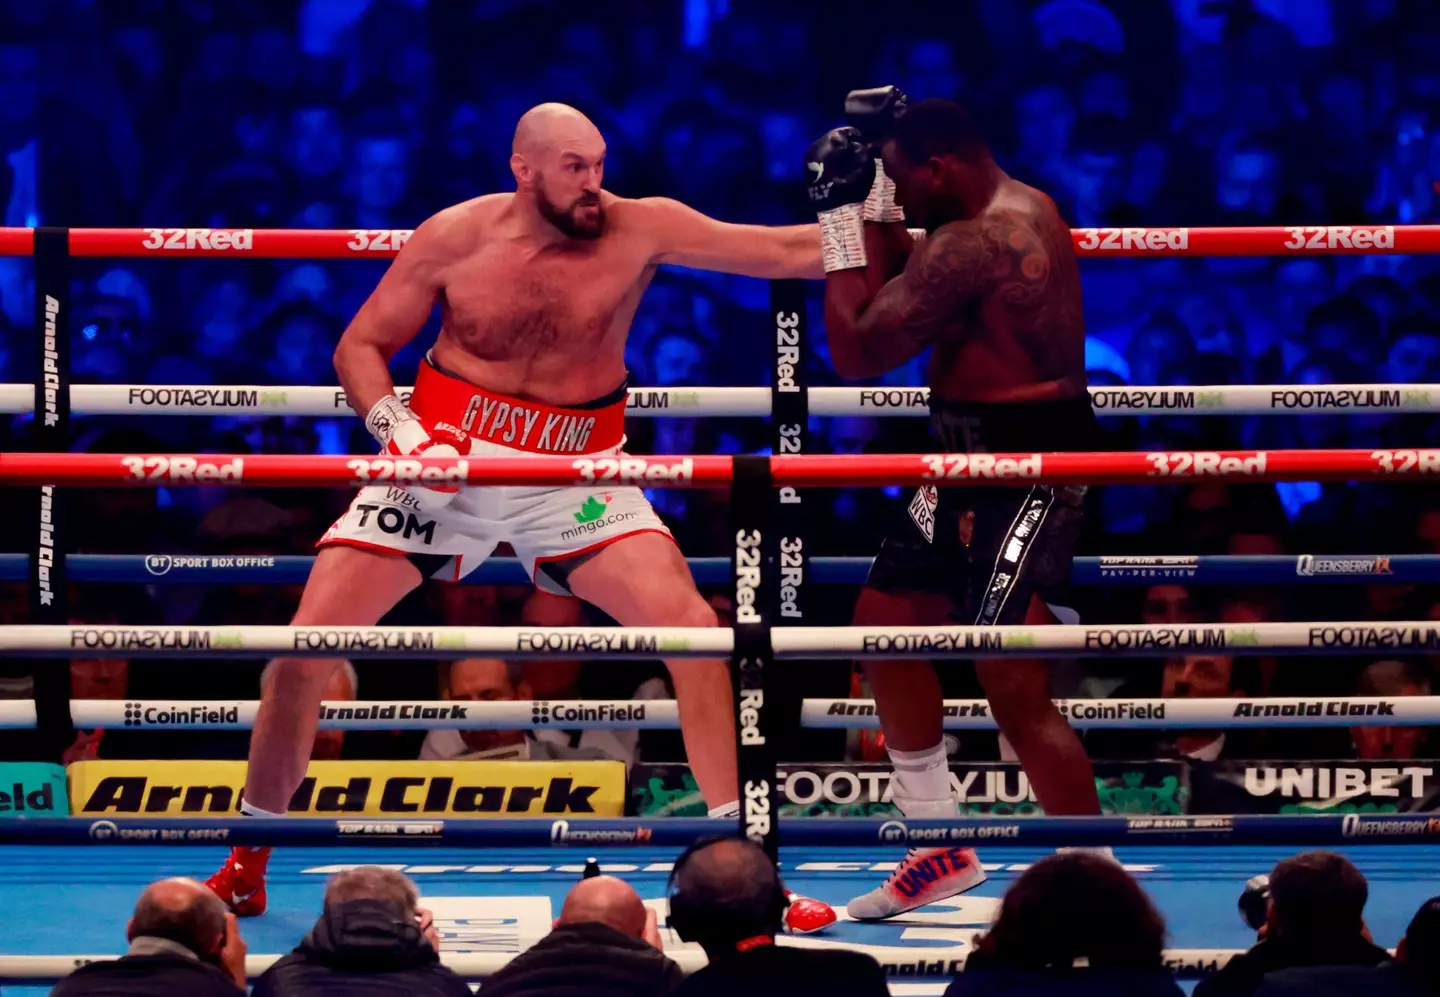 Fury announced his retirement after his fight with Whyte.